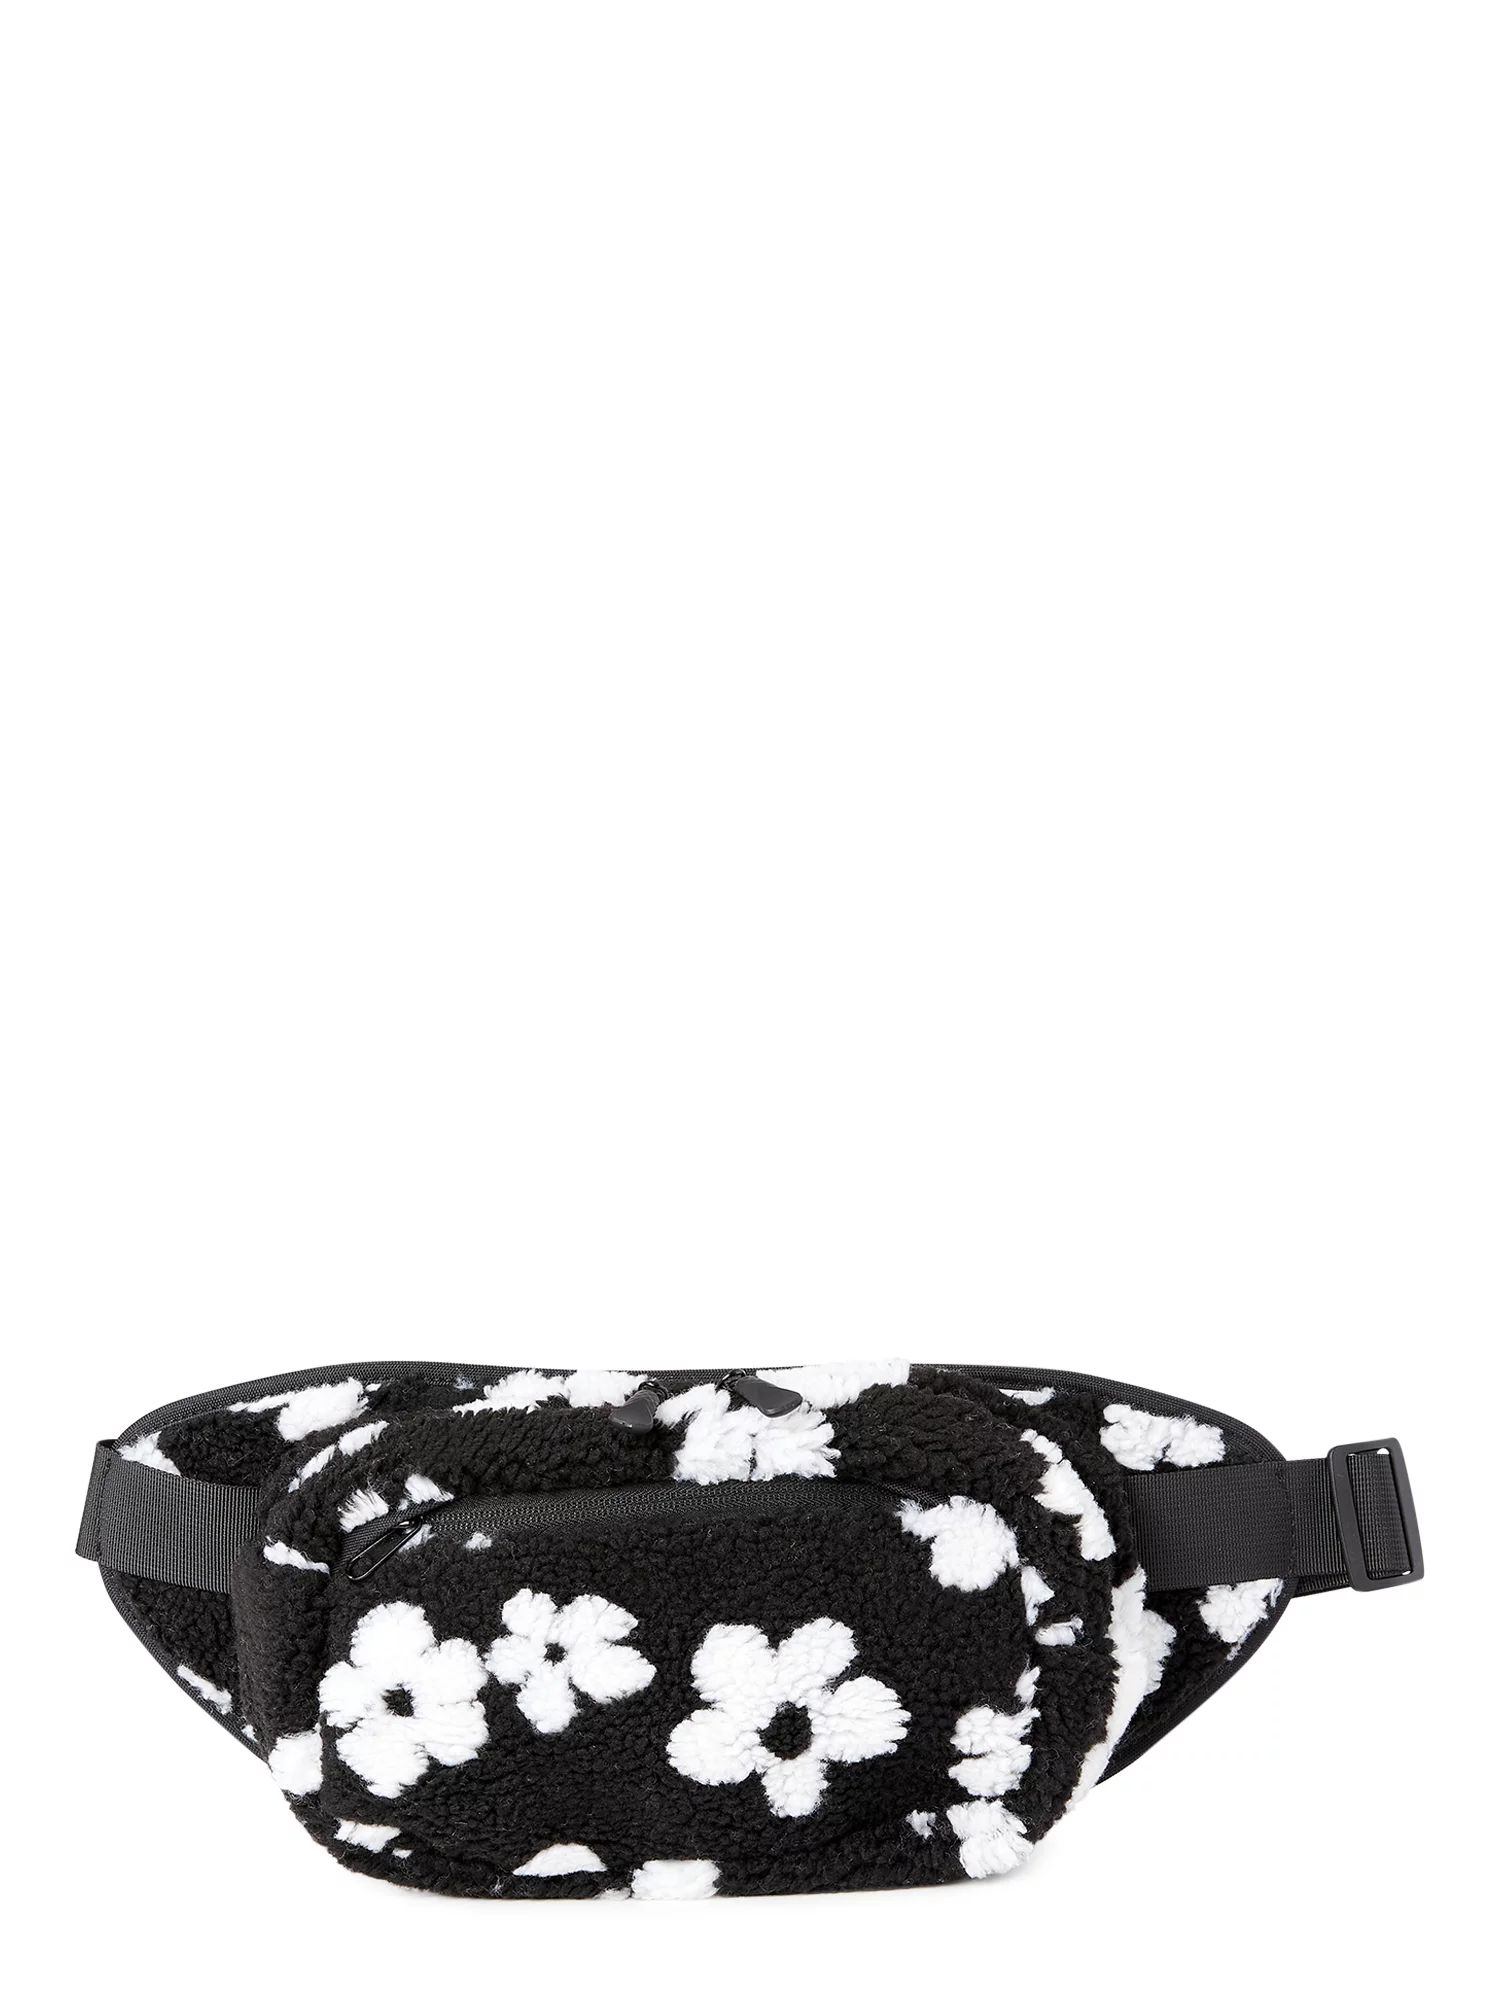 No Boundaries Women's Hands Free Rectangular Fanny Pack Black and White Floral | Walmart (US)